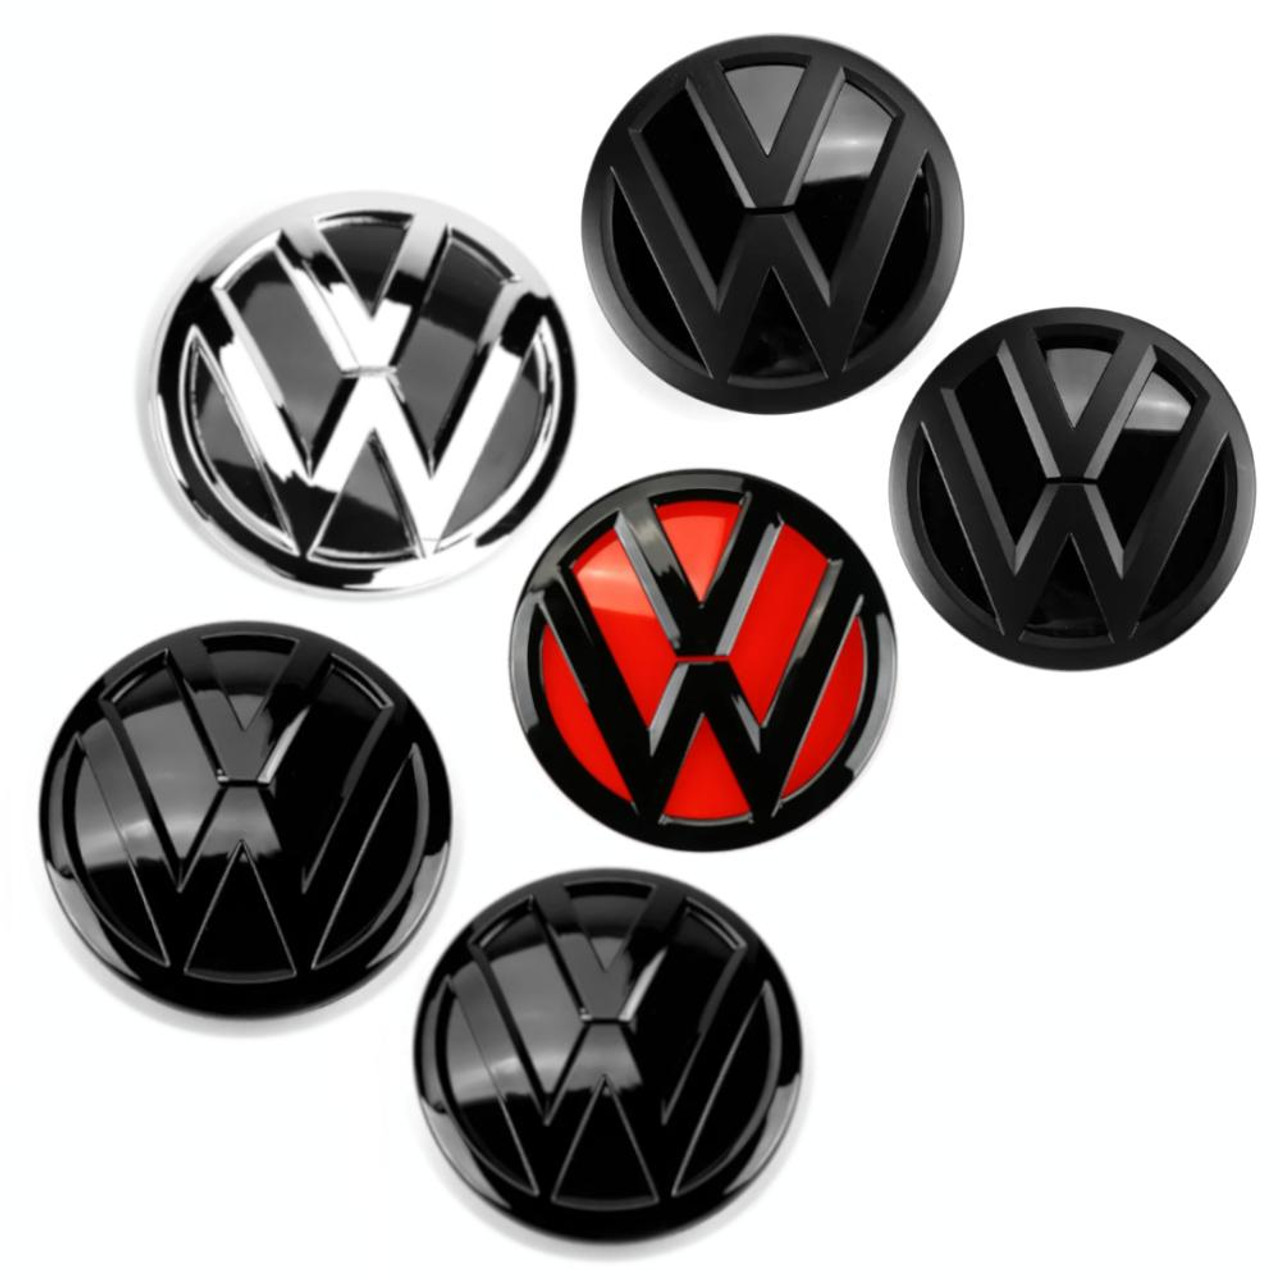 https://cdn11.bigcommerce.com/s-ktdamhfv2f/images/stencil/1280x1280/products/6184/24377/volkswagen-logo-front-rear-emblem-for-vw-polo-2014-2016-29244241182900__92313.1673564977.jpg?c=1